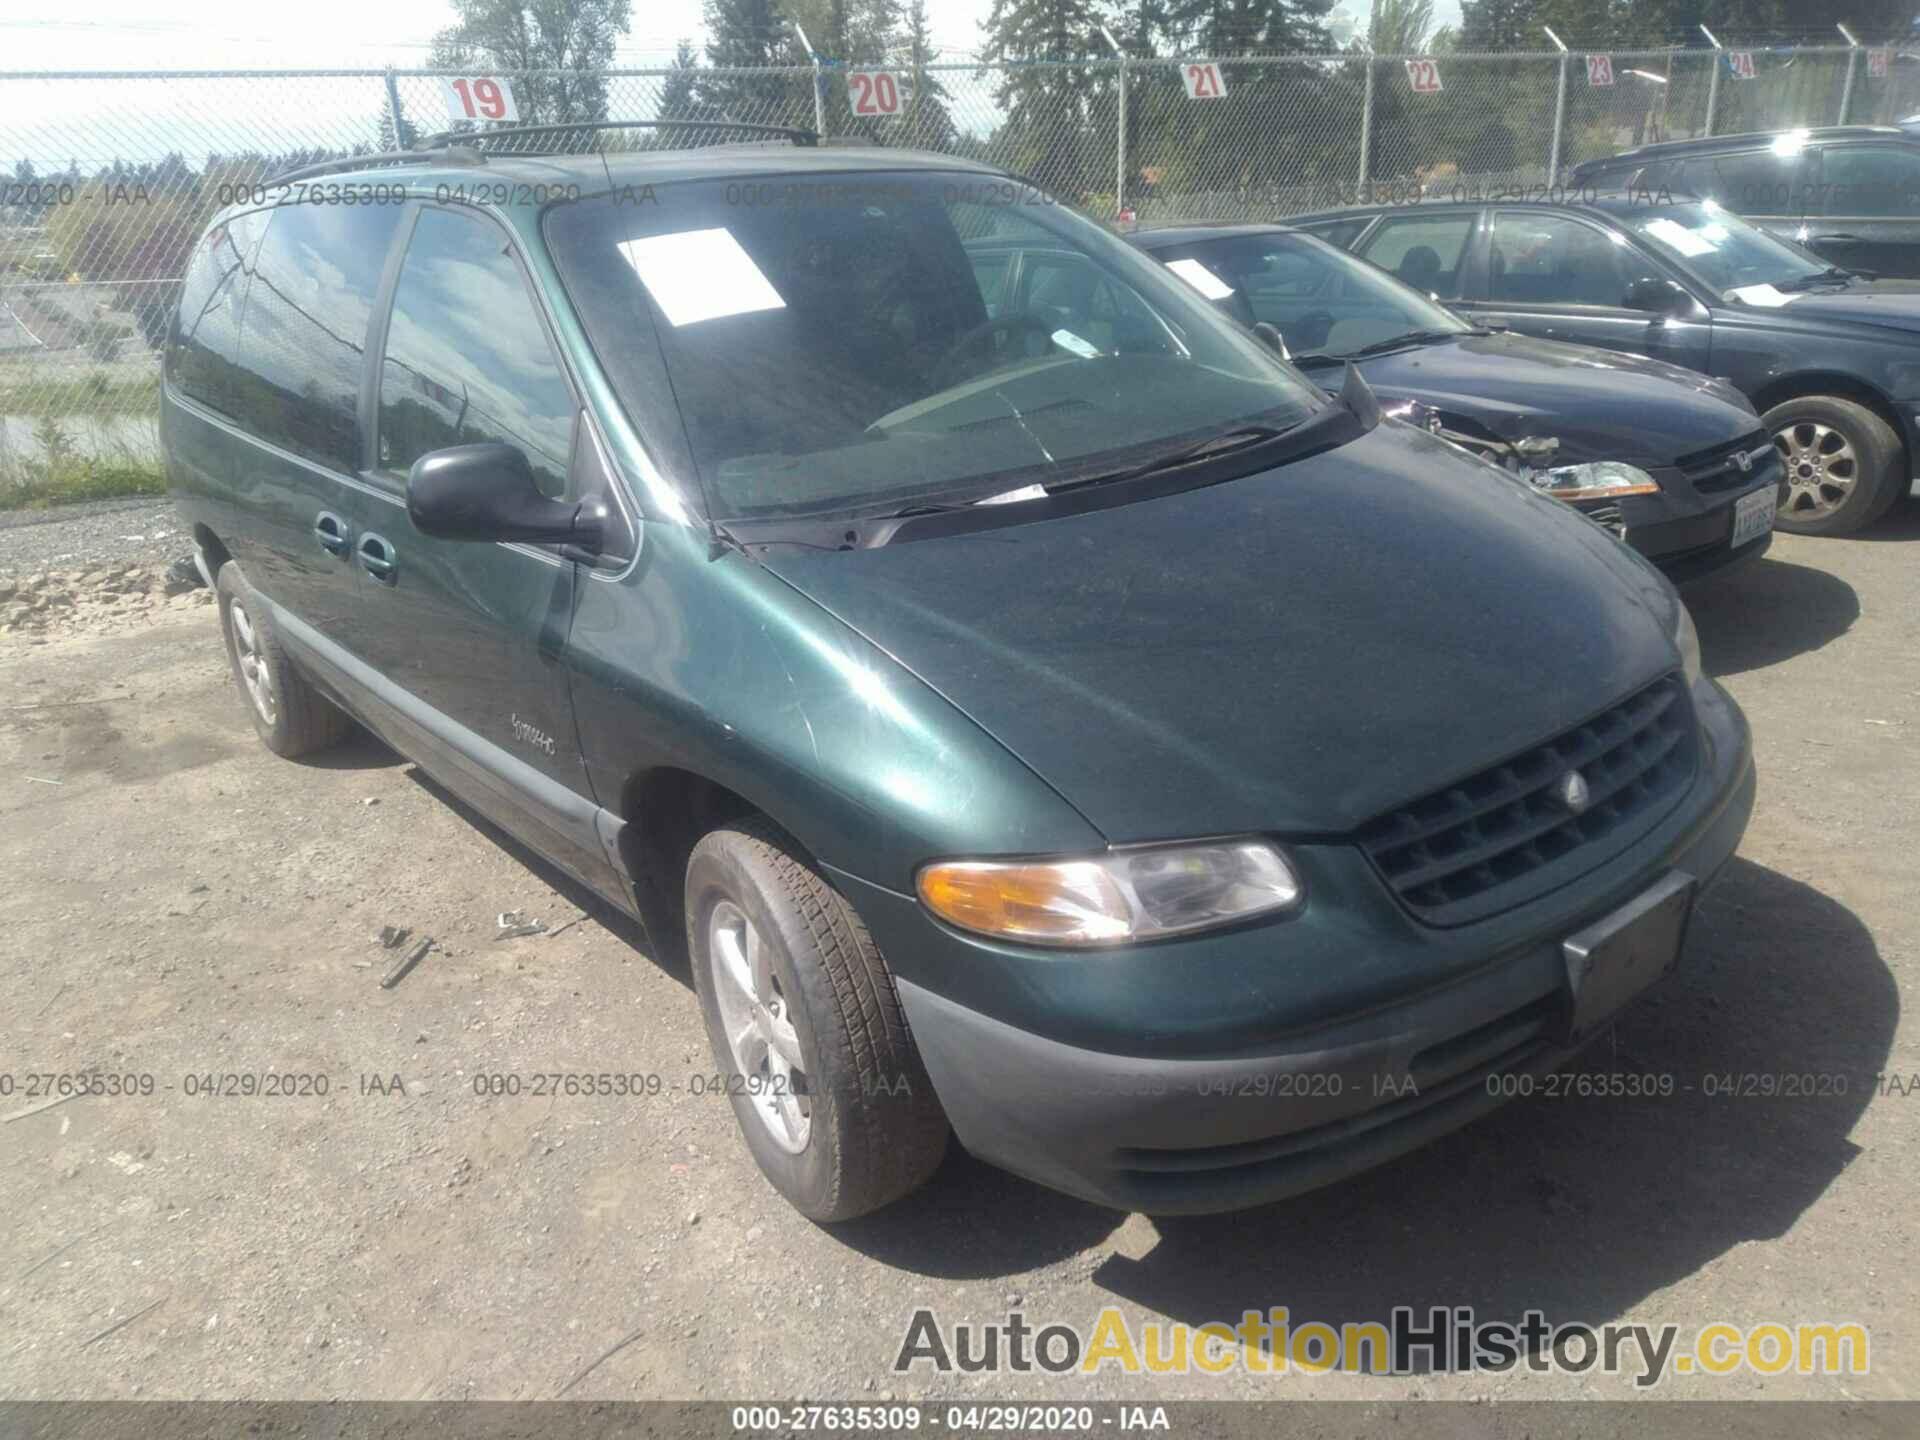 PLYMOUTH GRAND VOYAGER SE/EXPRESSO, 1P4GP44R8WB732010